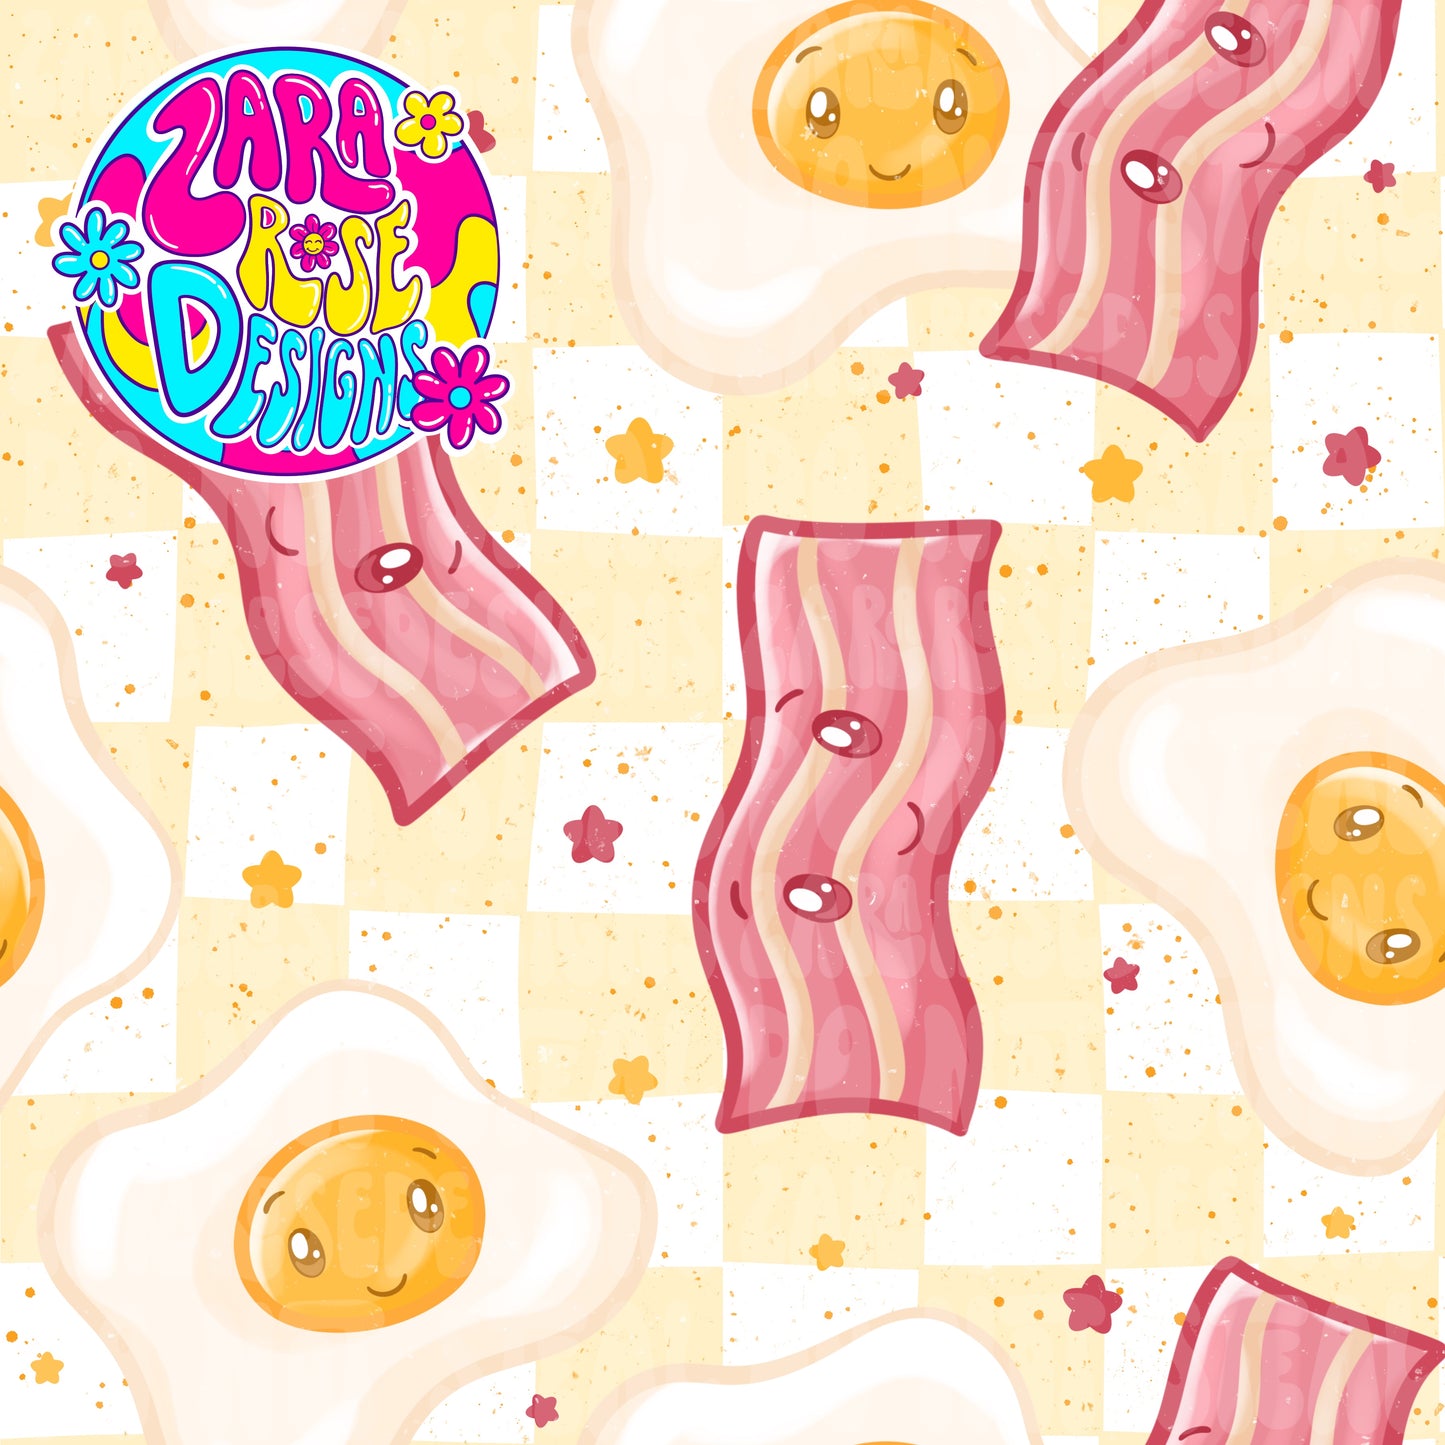 Bacon and Eggs